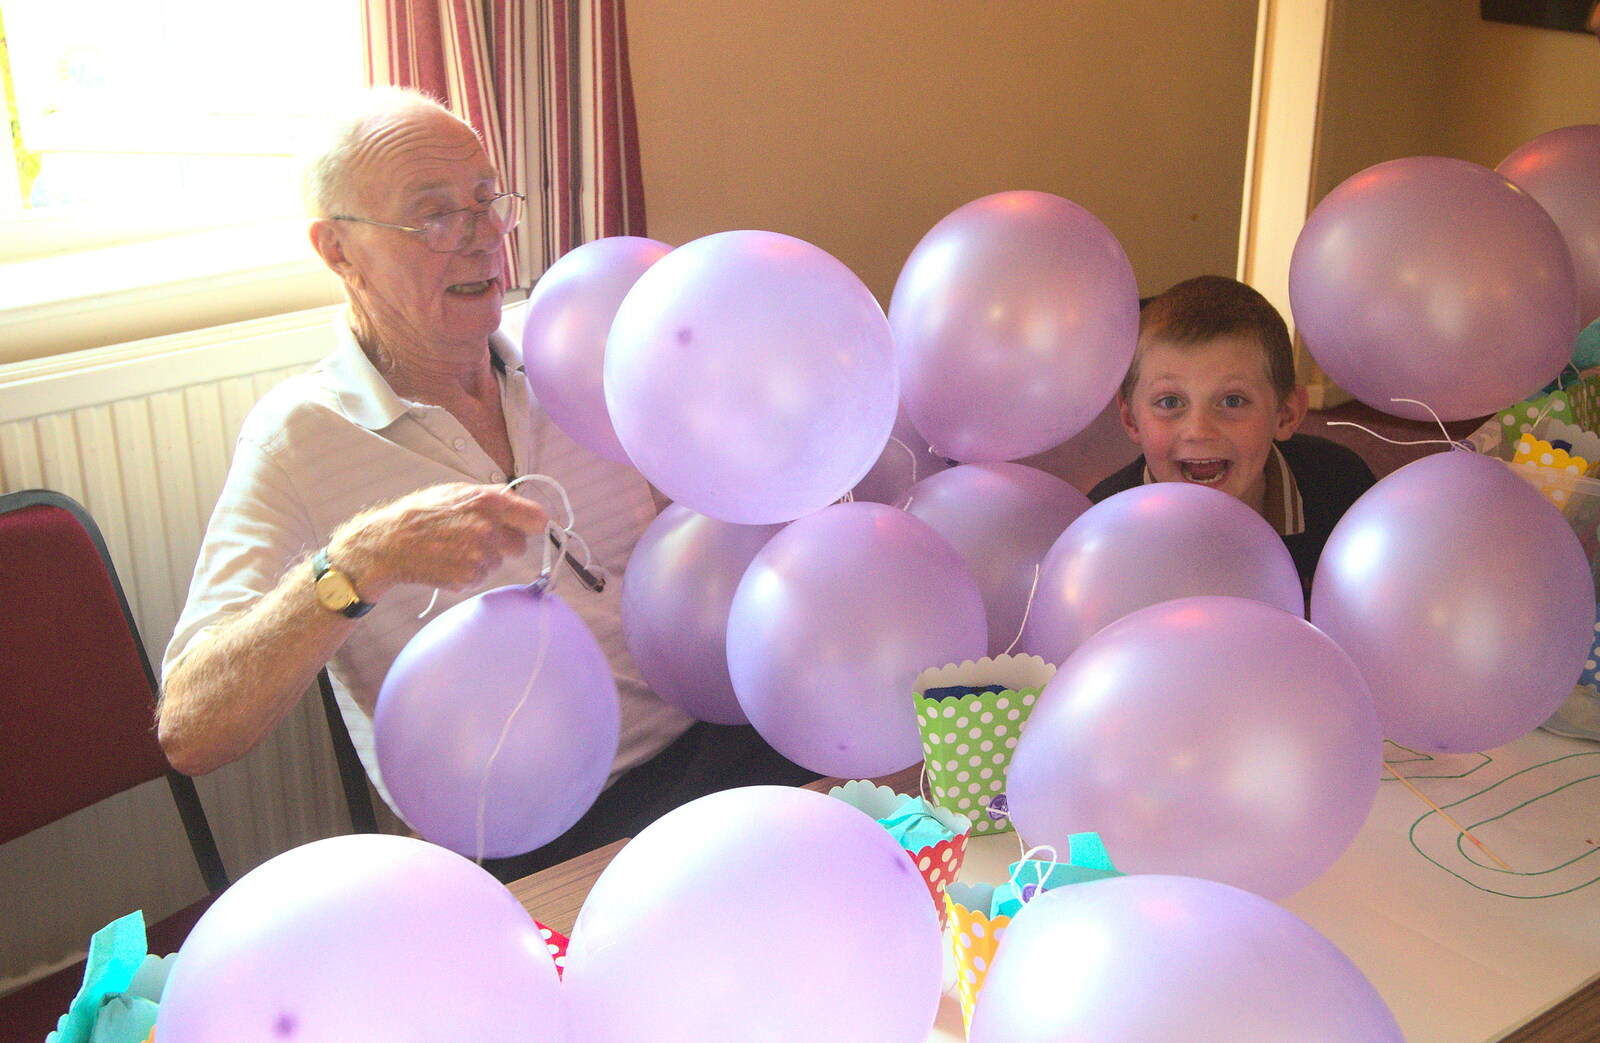 Grandad and Matthew under a pile of balloons from Fred's Fifth Birthday, The Village Hall, Brome, Suffolk - 28th September 2013